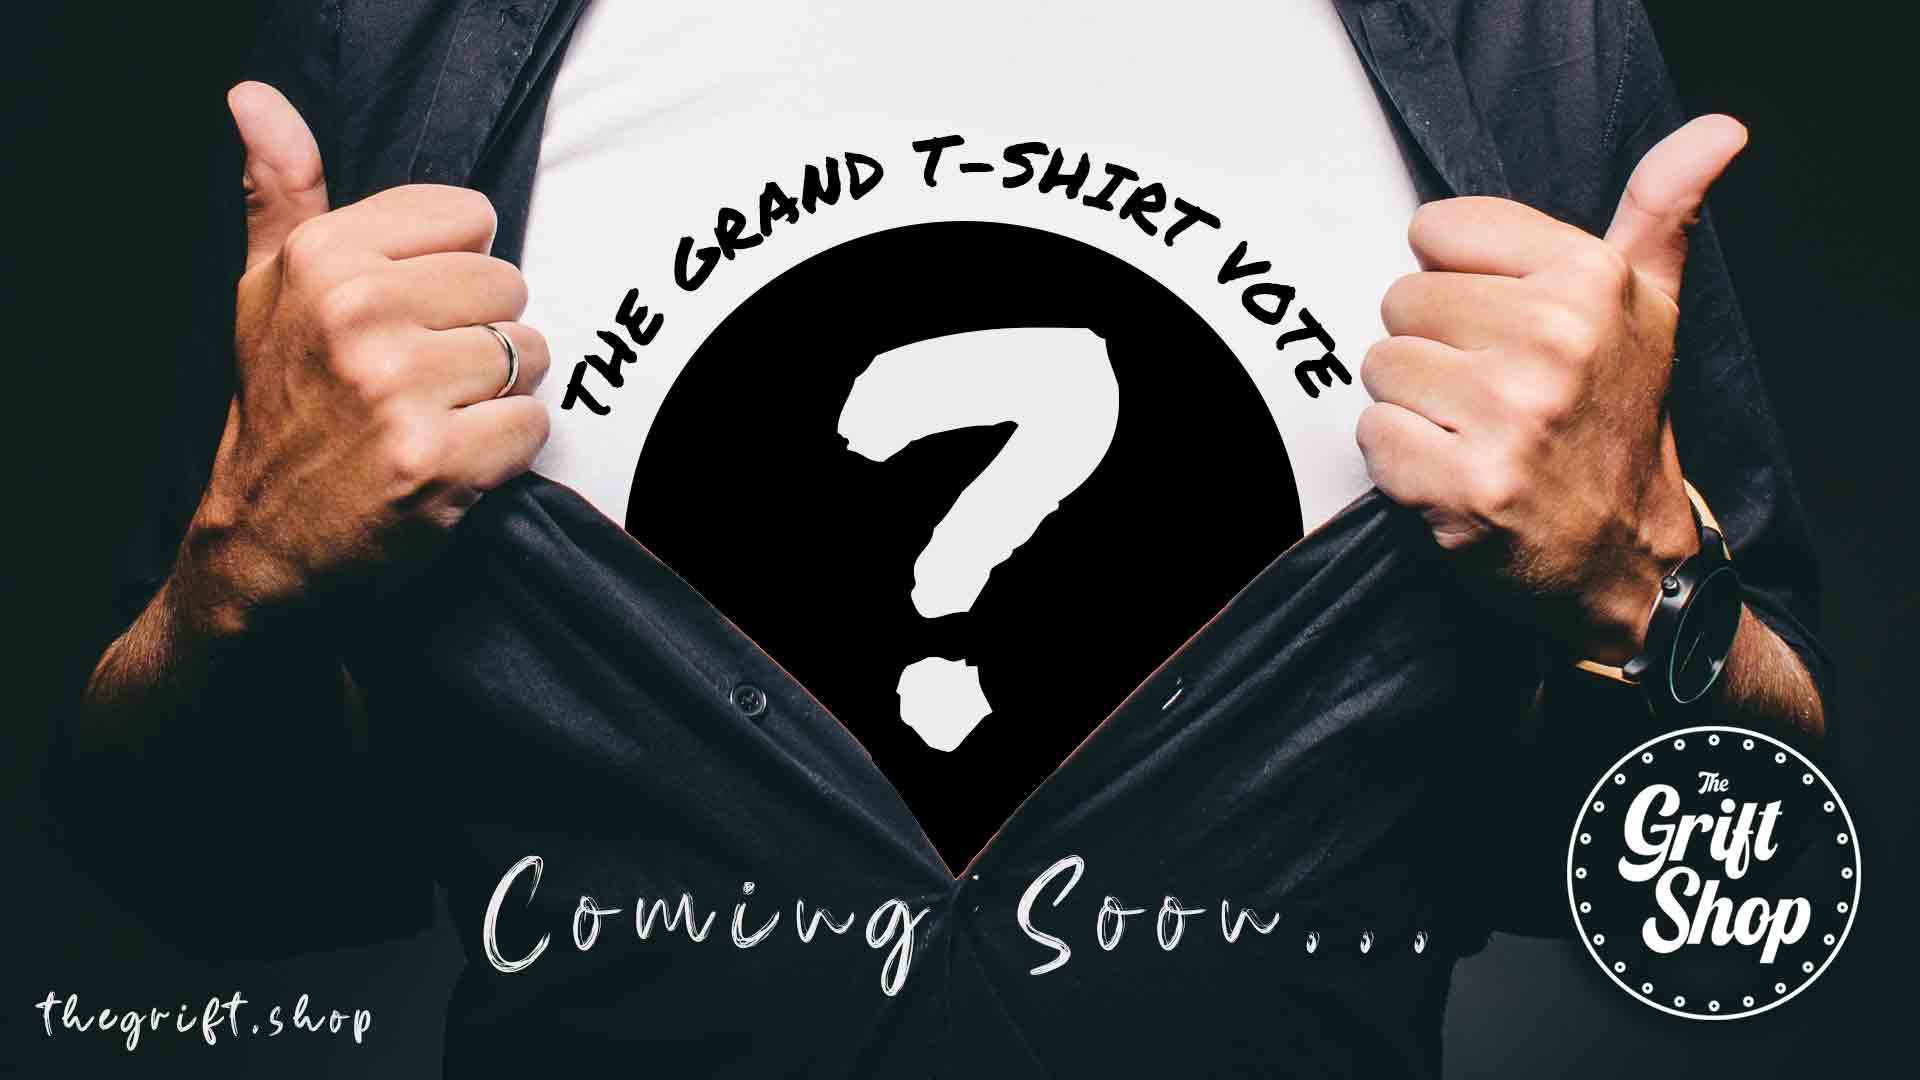 The Grand T-Shirt Vote: Coming Soon